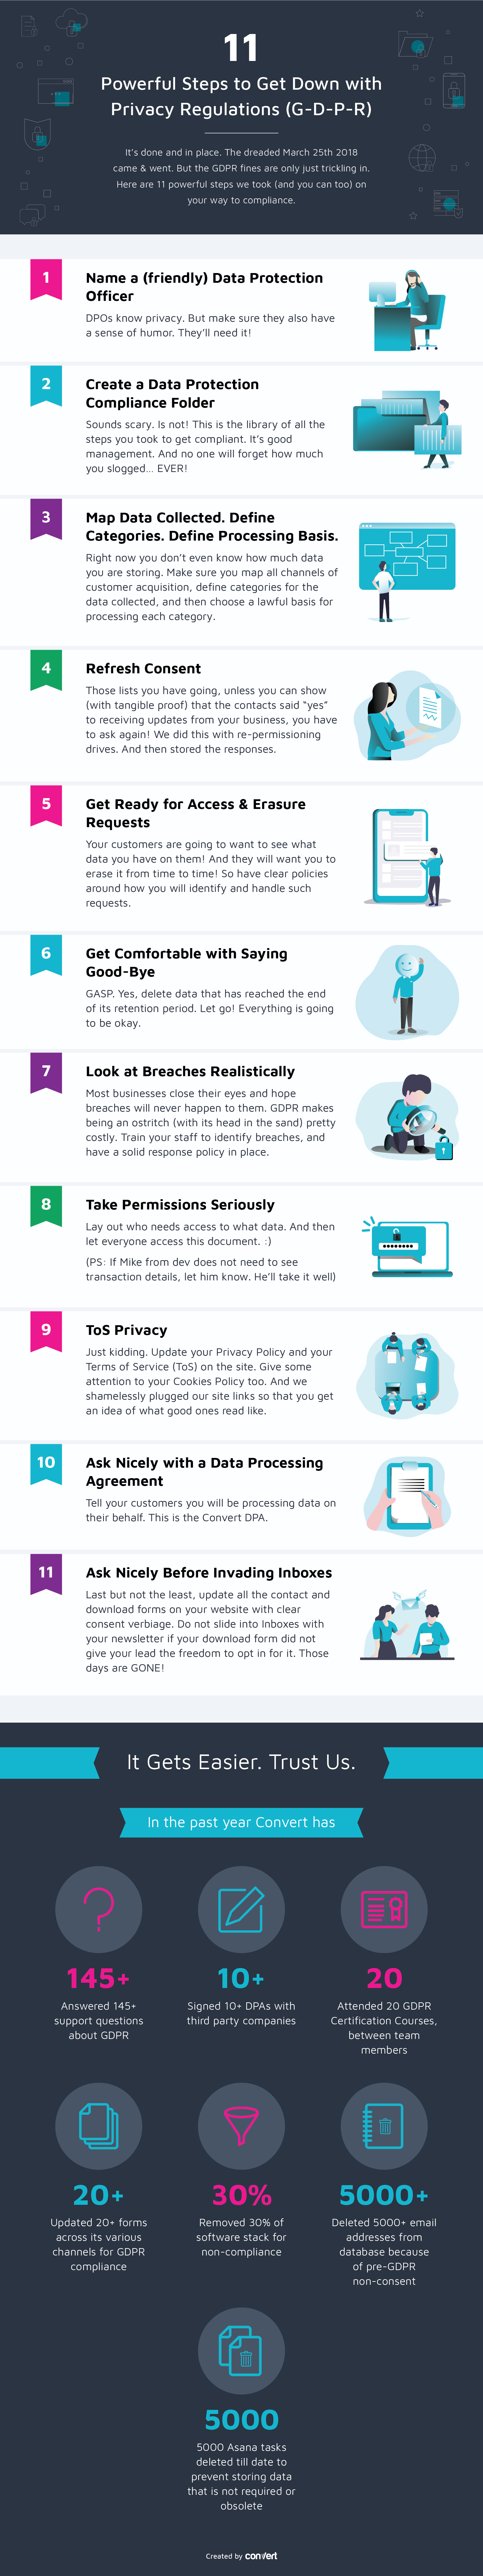 11 powerful steps to get down with privacy regulations (G-D-P-R)